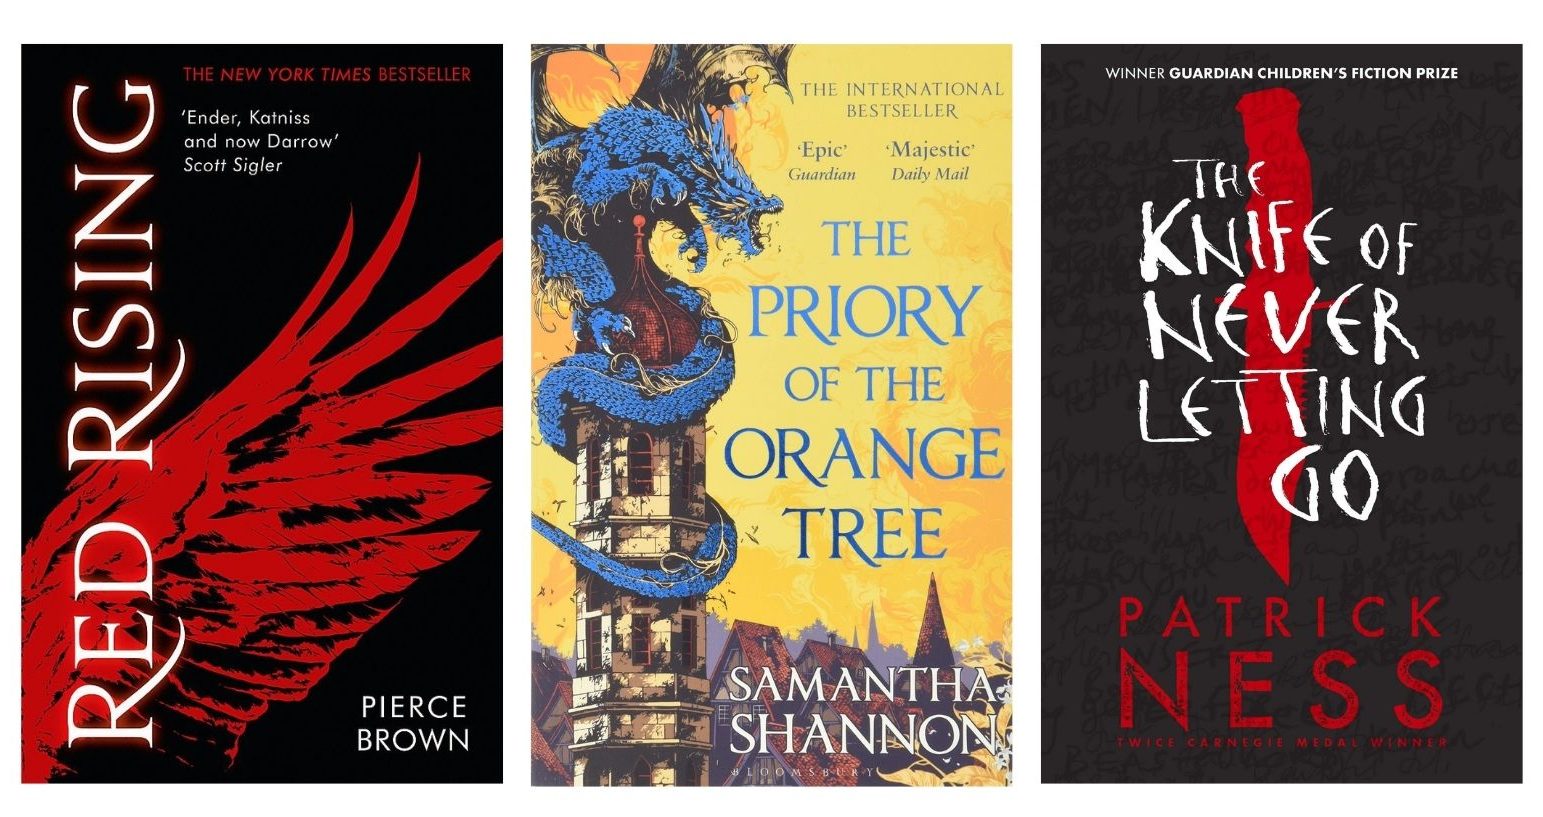 Red Rising, The Priory of the Orange Tree and The Knife of Never Letting Go